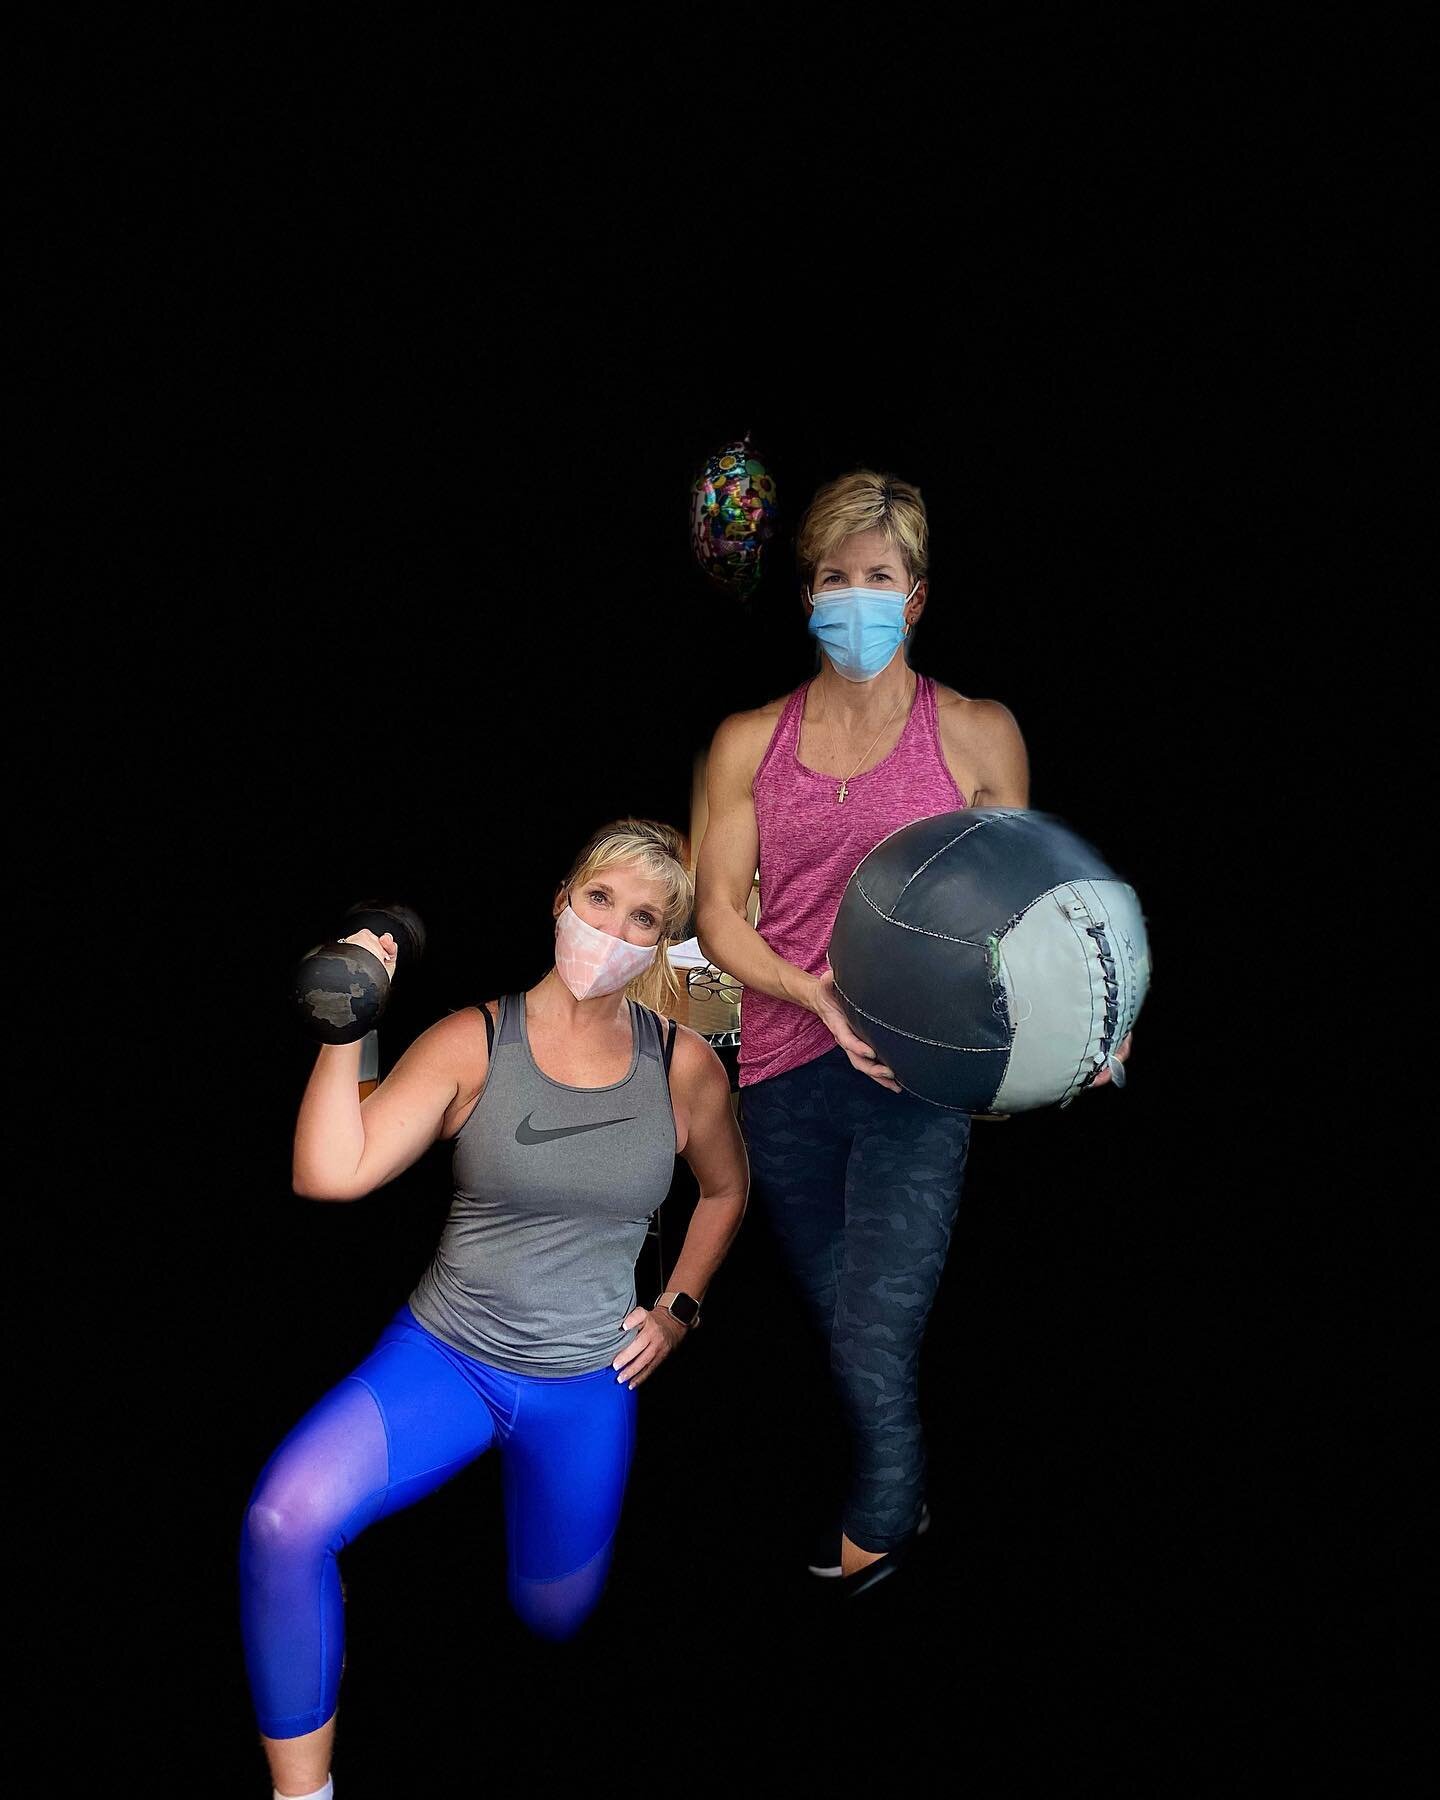 Let the birthday celebrations begin! These two kicked off year 55 with an awesome workout. Cheers to being strong ladies! 🎉 🎈 💪 
🥳 
🥳
🥳
#strongwomen #birthdayworkout #bettereveryday #rufffitness #trainsmart #ageisbutanumber #strong #partnerwork